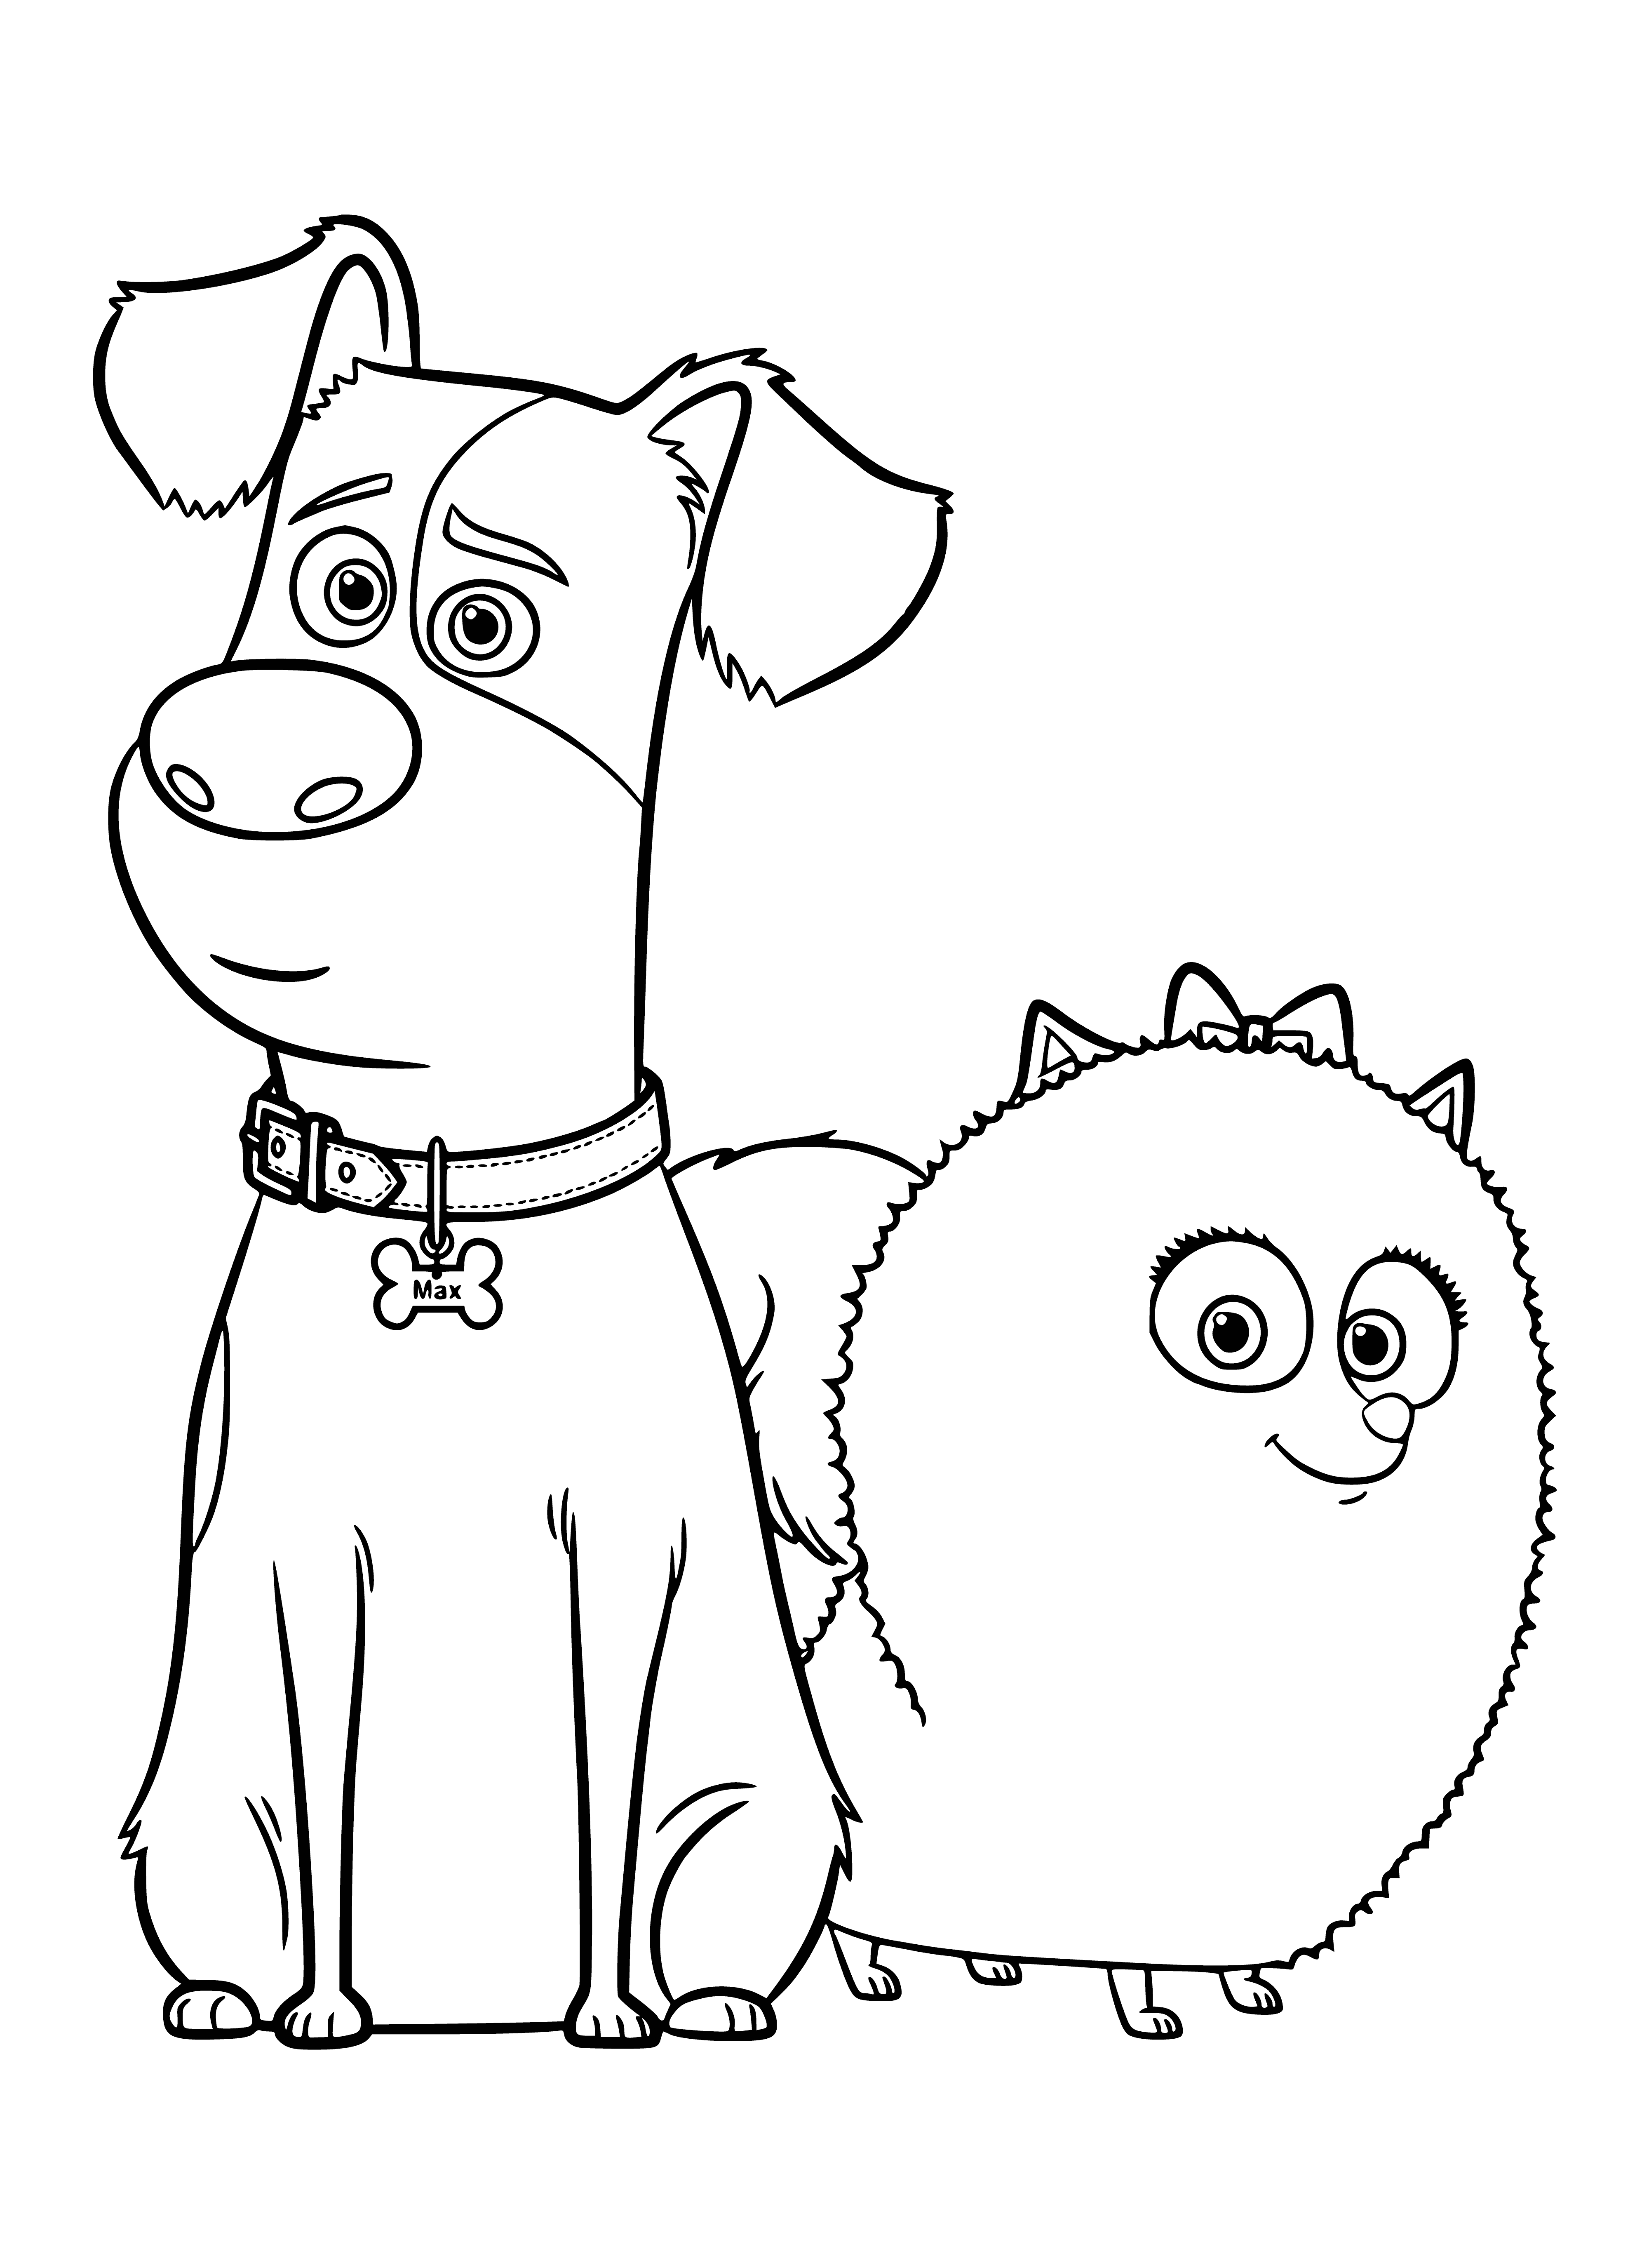 coloring page: Two happy dogs sit in a room with a plant and a clock, one atop a yellow chair facing the other.